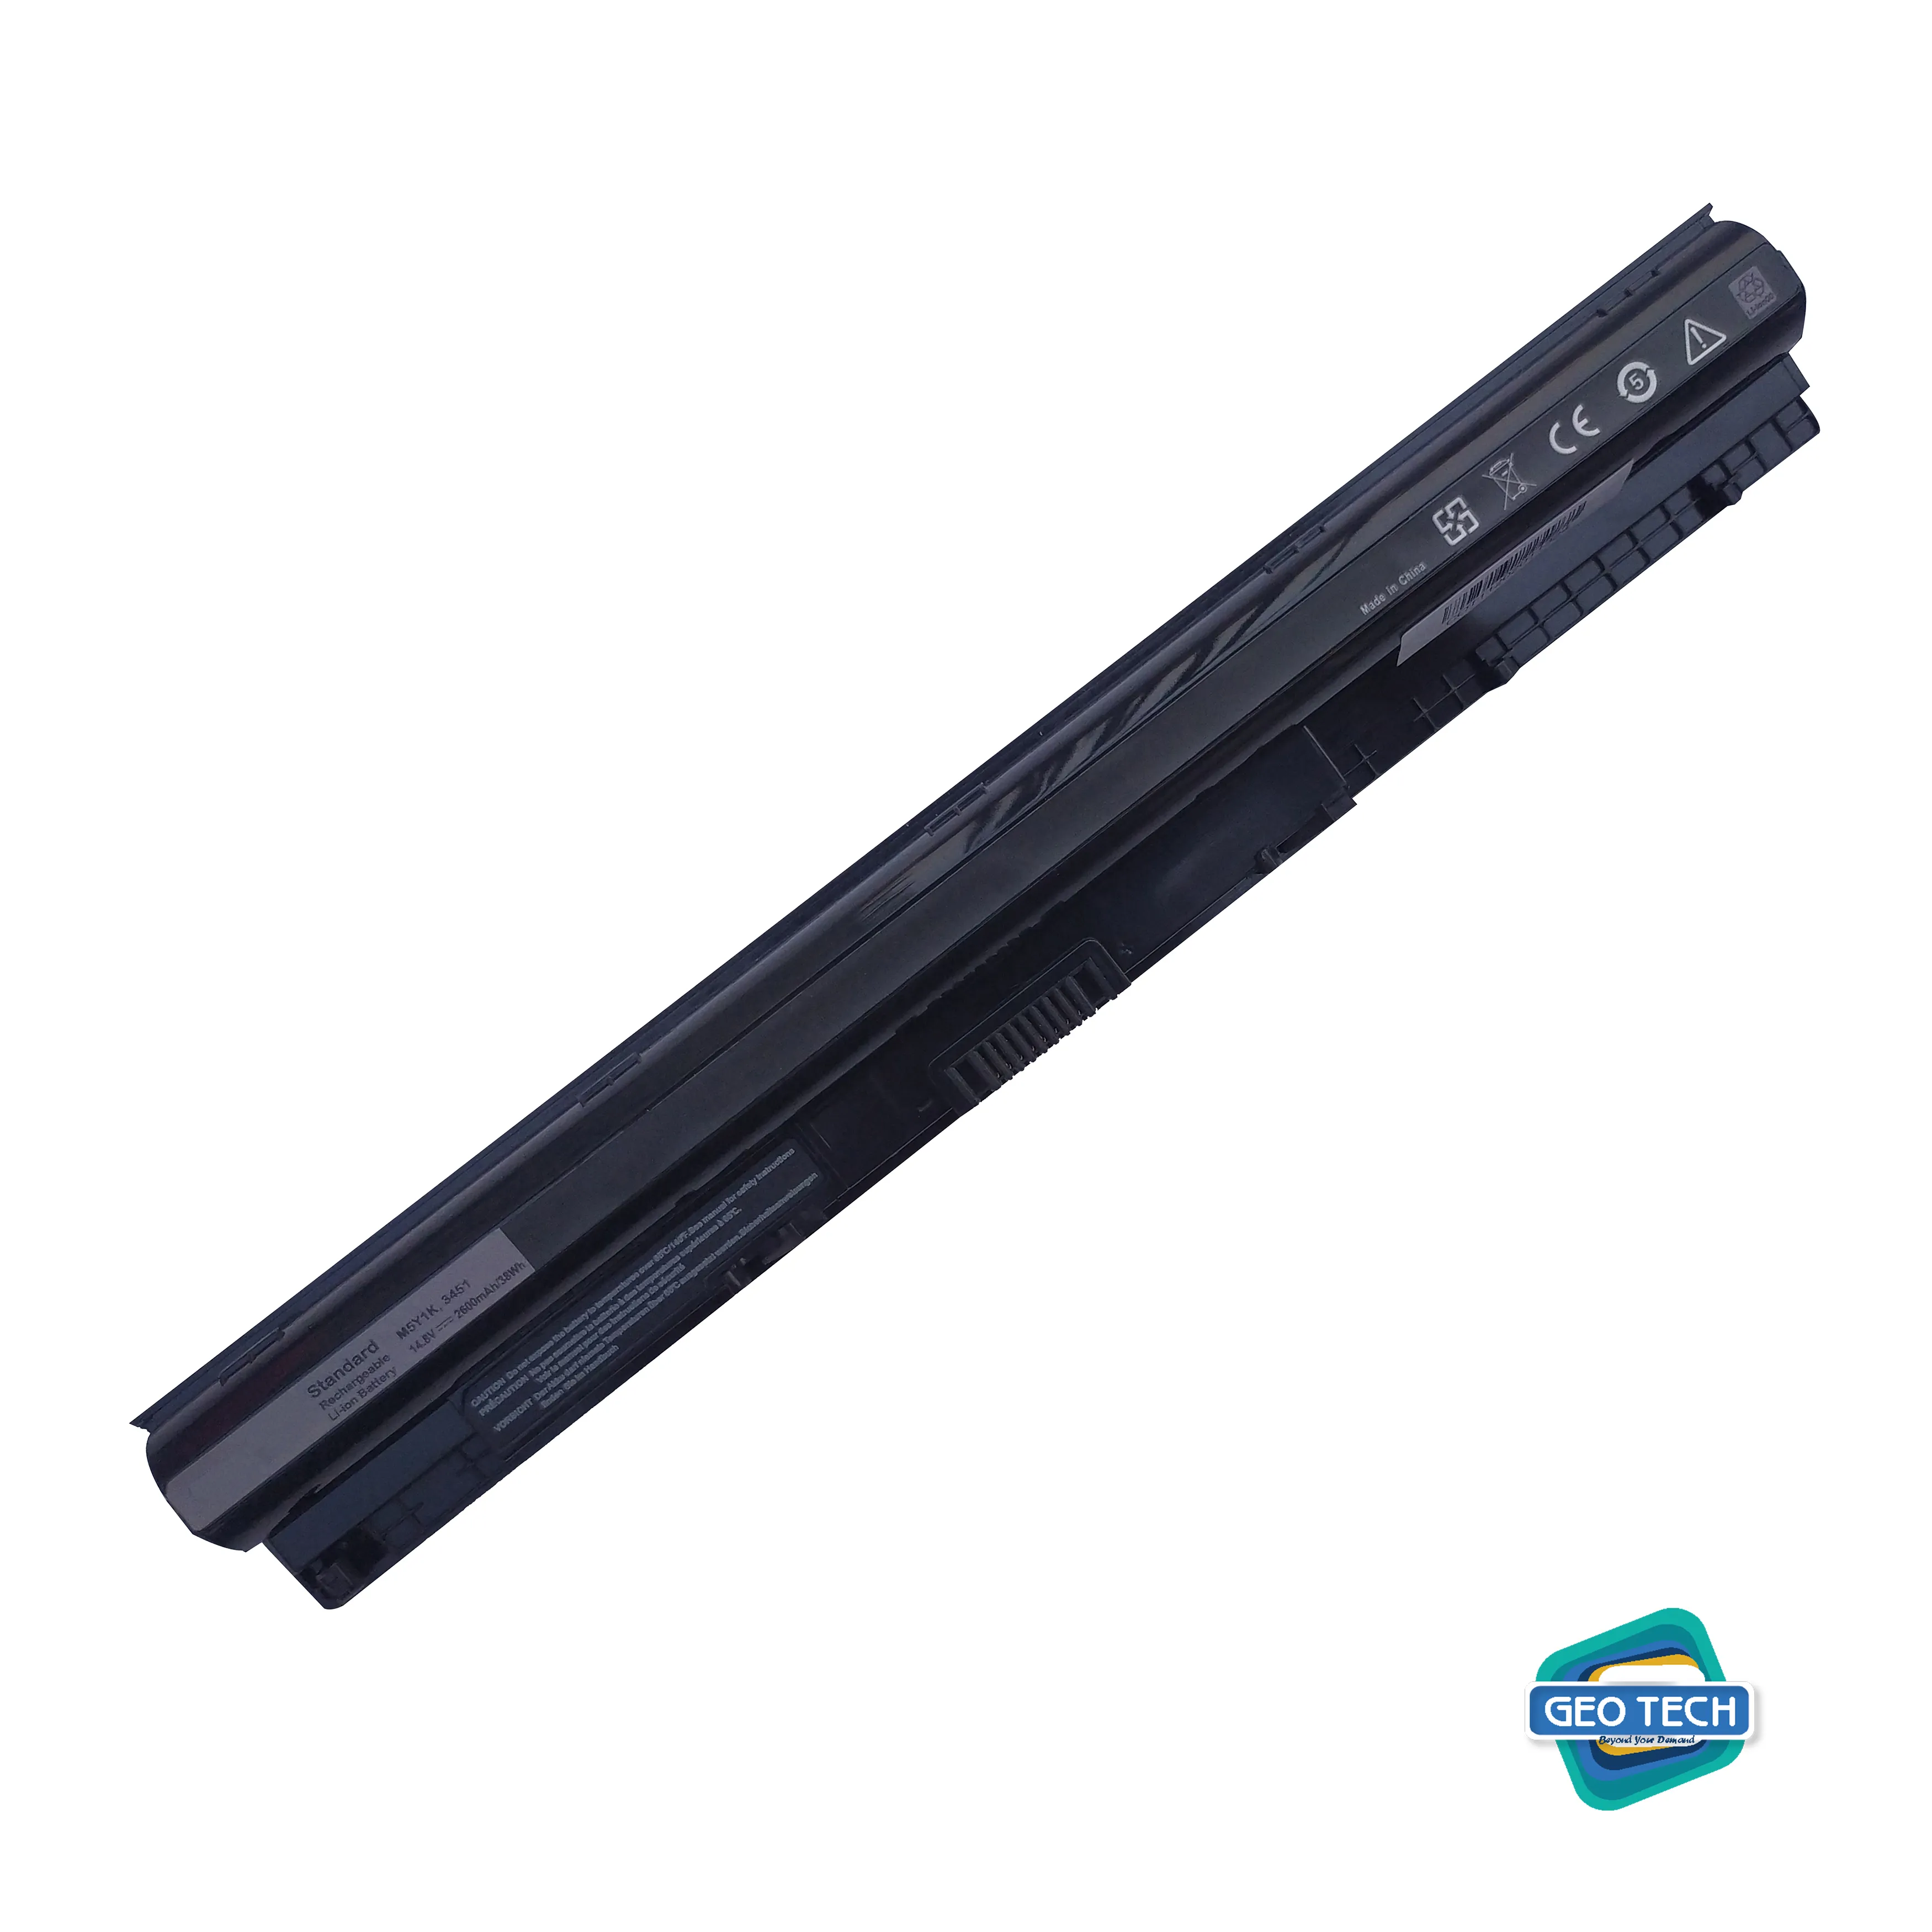 New M5Y1k Laptop Battery 14.8V 38WH For DELL Inspiron 3451 3551 5558 5758 M5Y1K Vostro